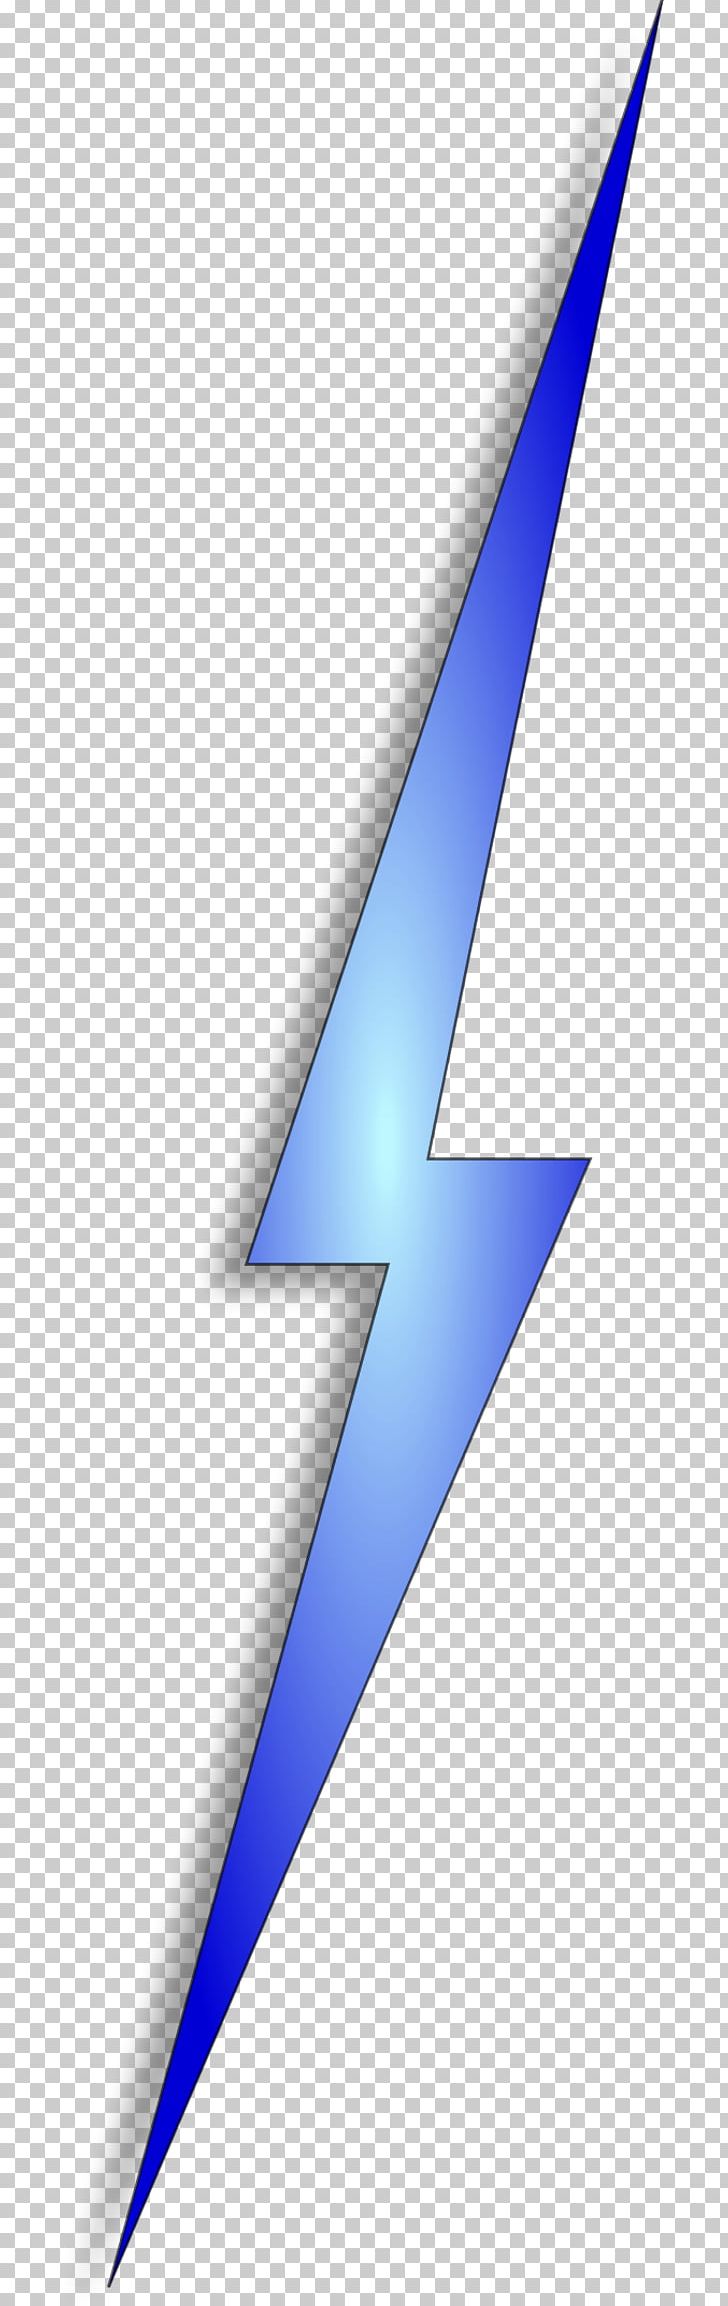 Electricity clipart zeus thunderbolt. Lightning png angle computer